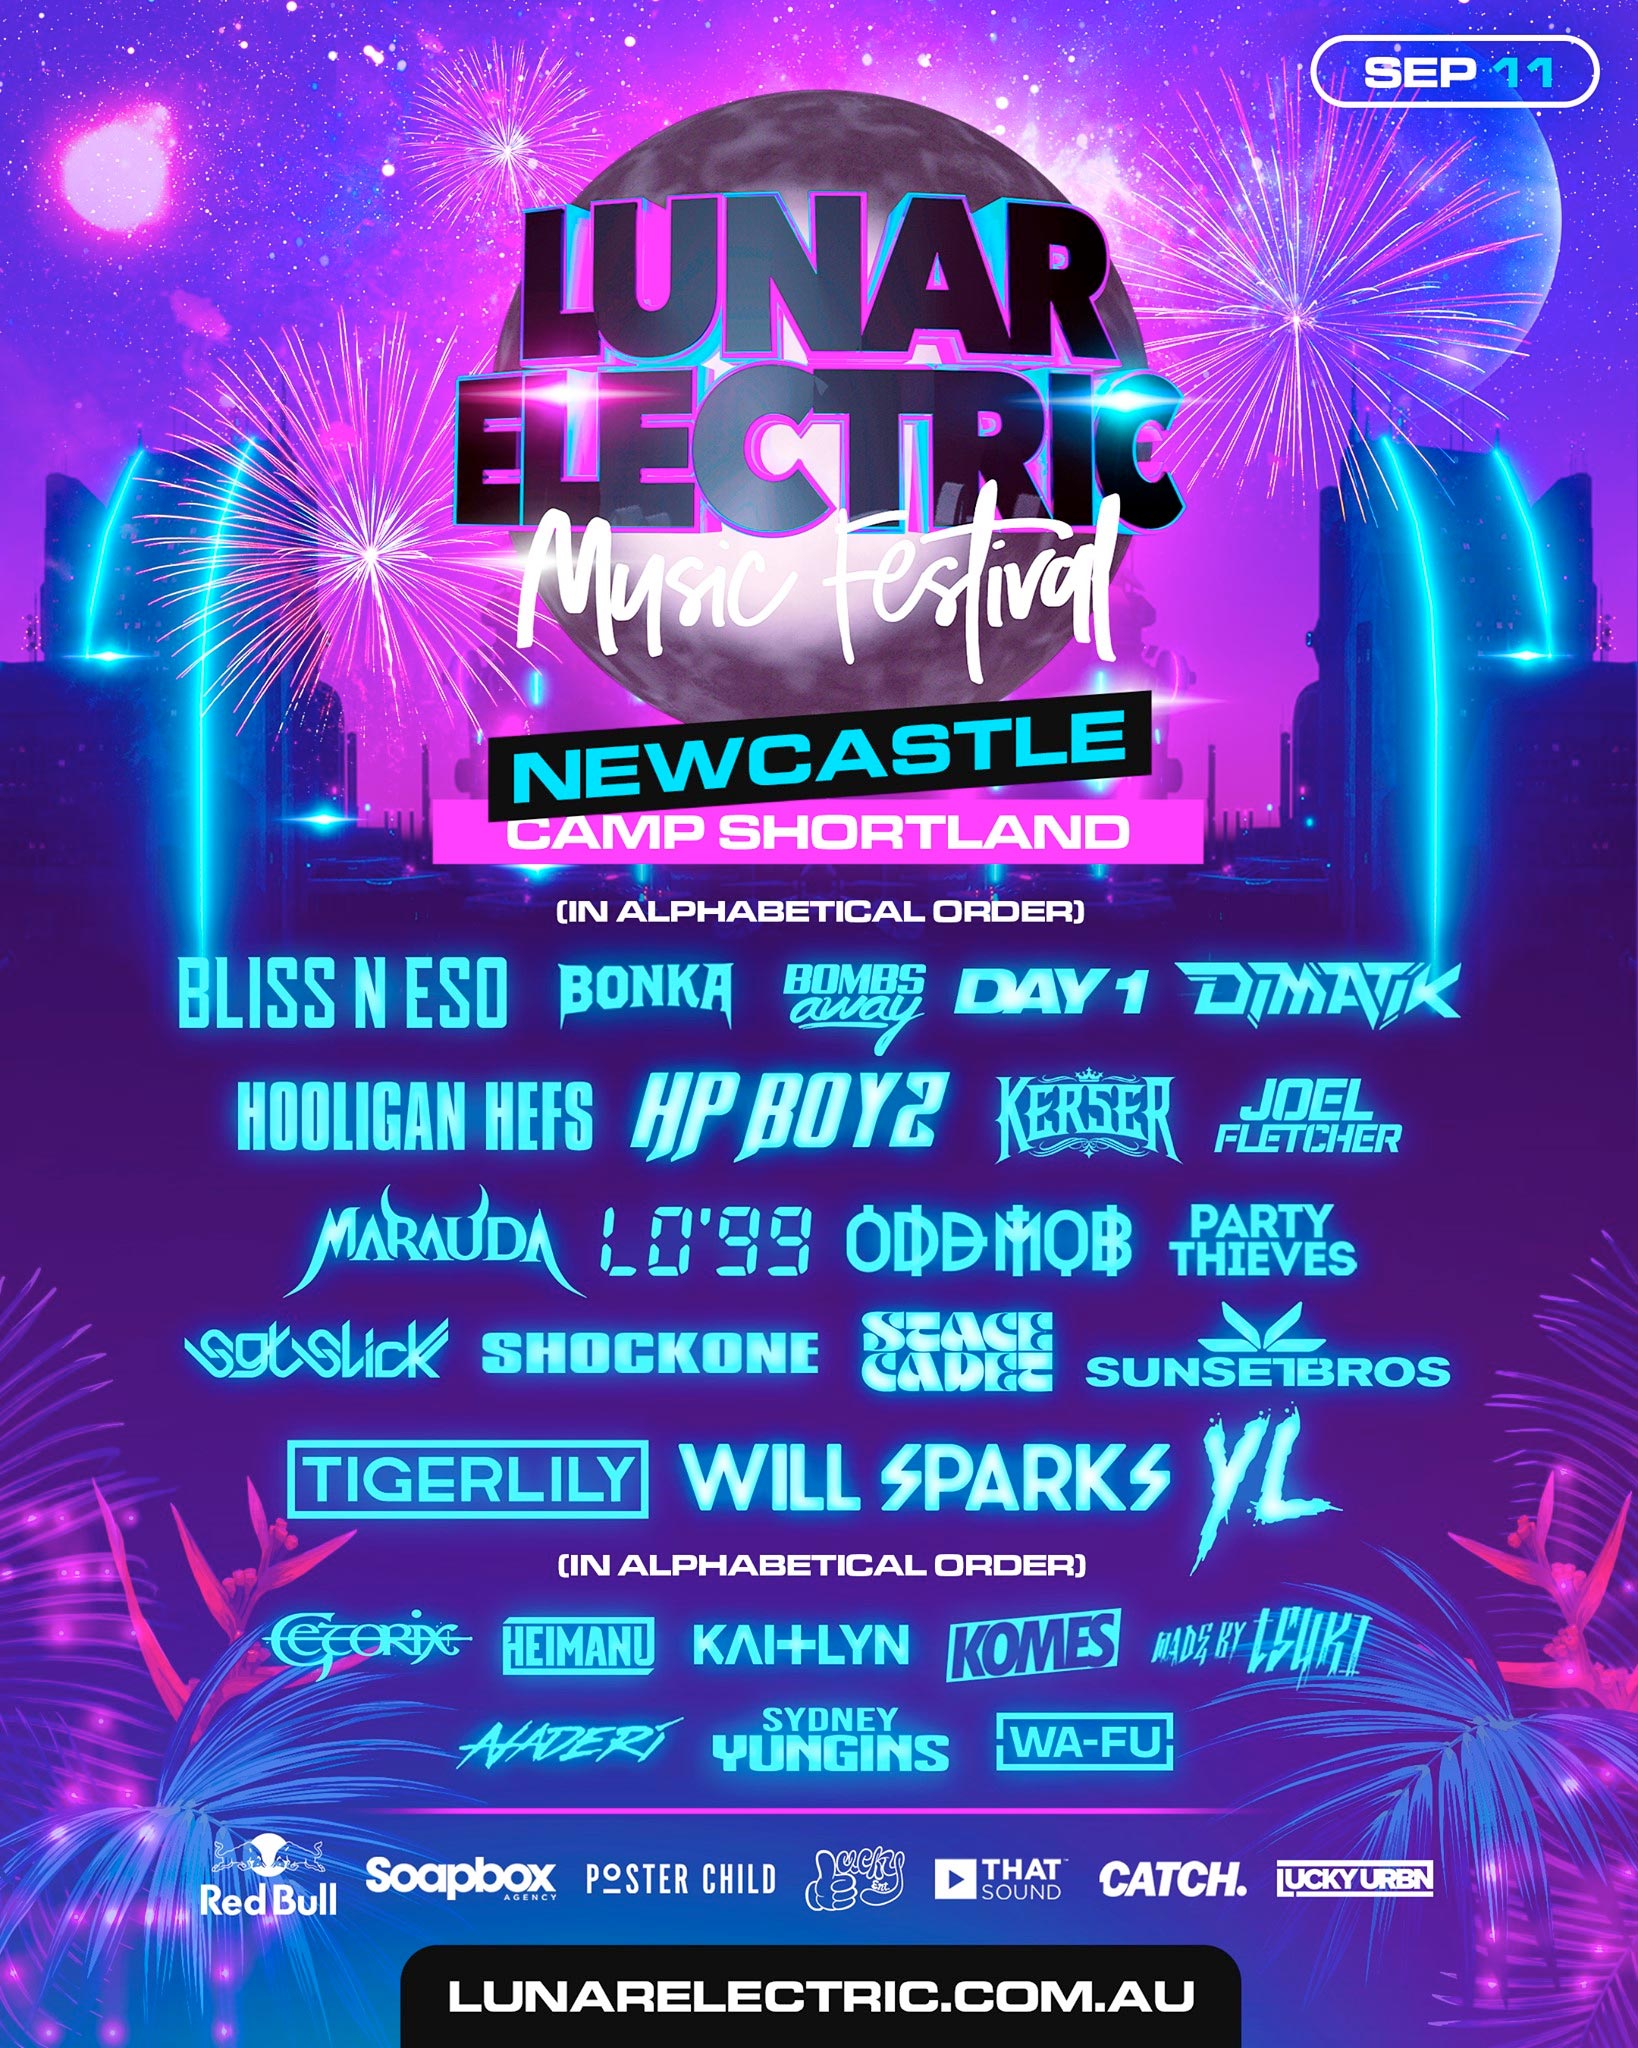 lunar-electric-festival-2021-newcastle-lineup-poster